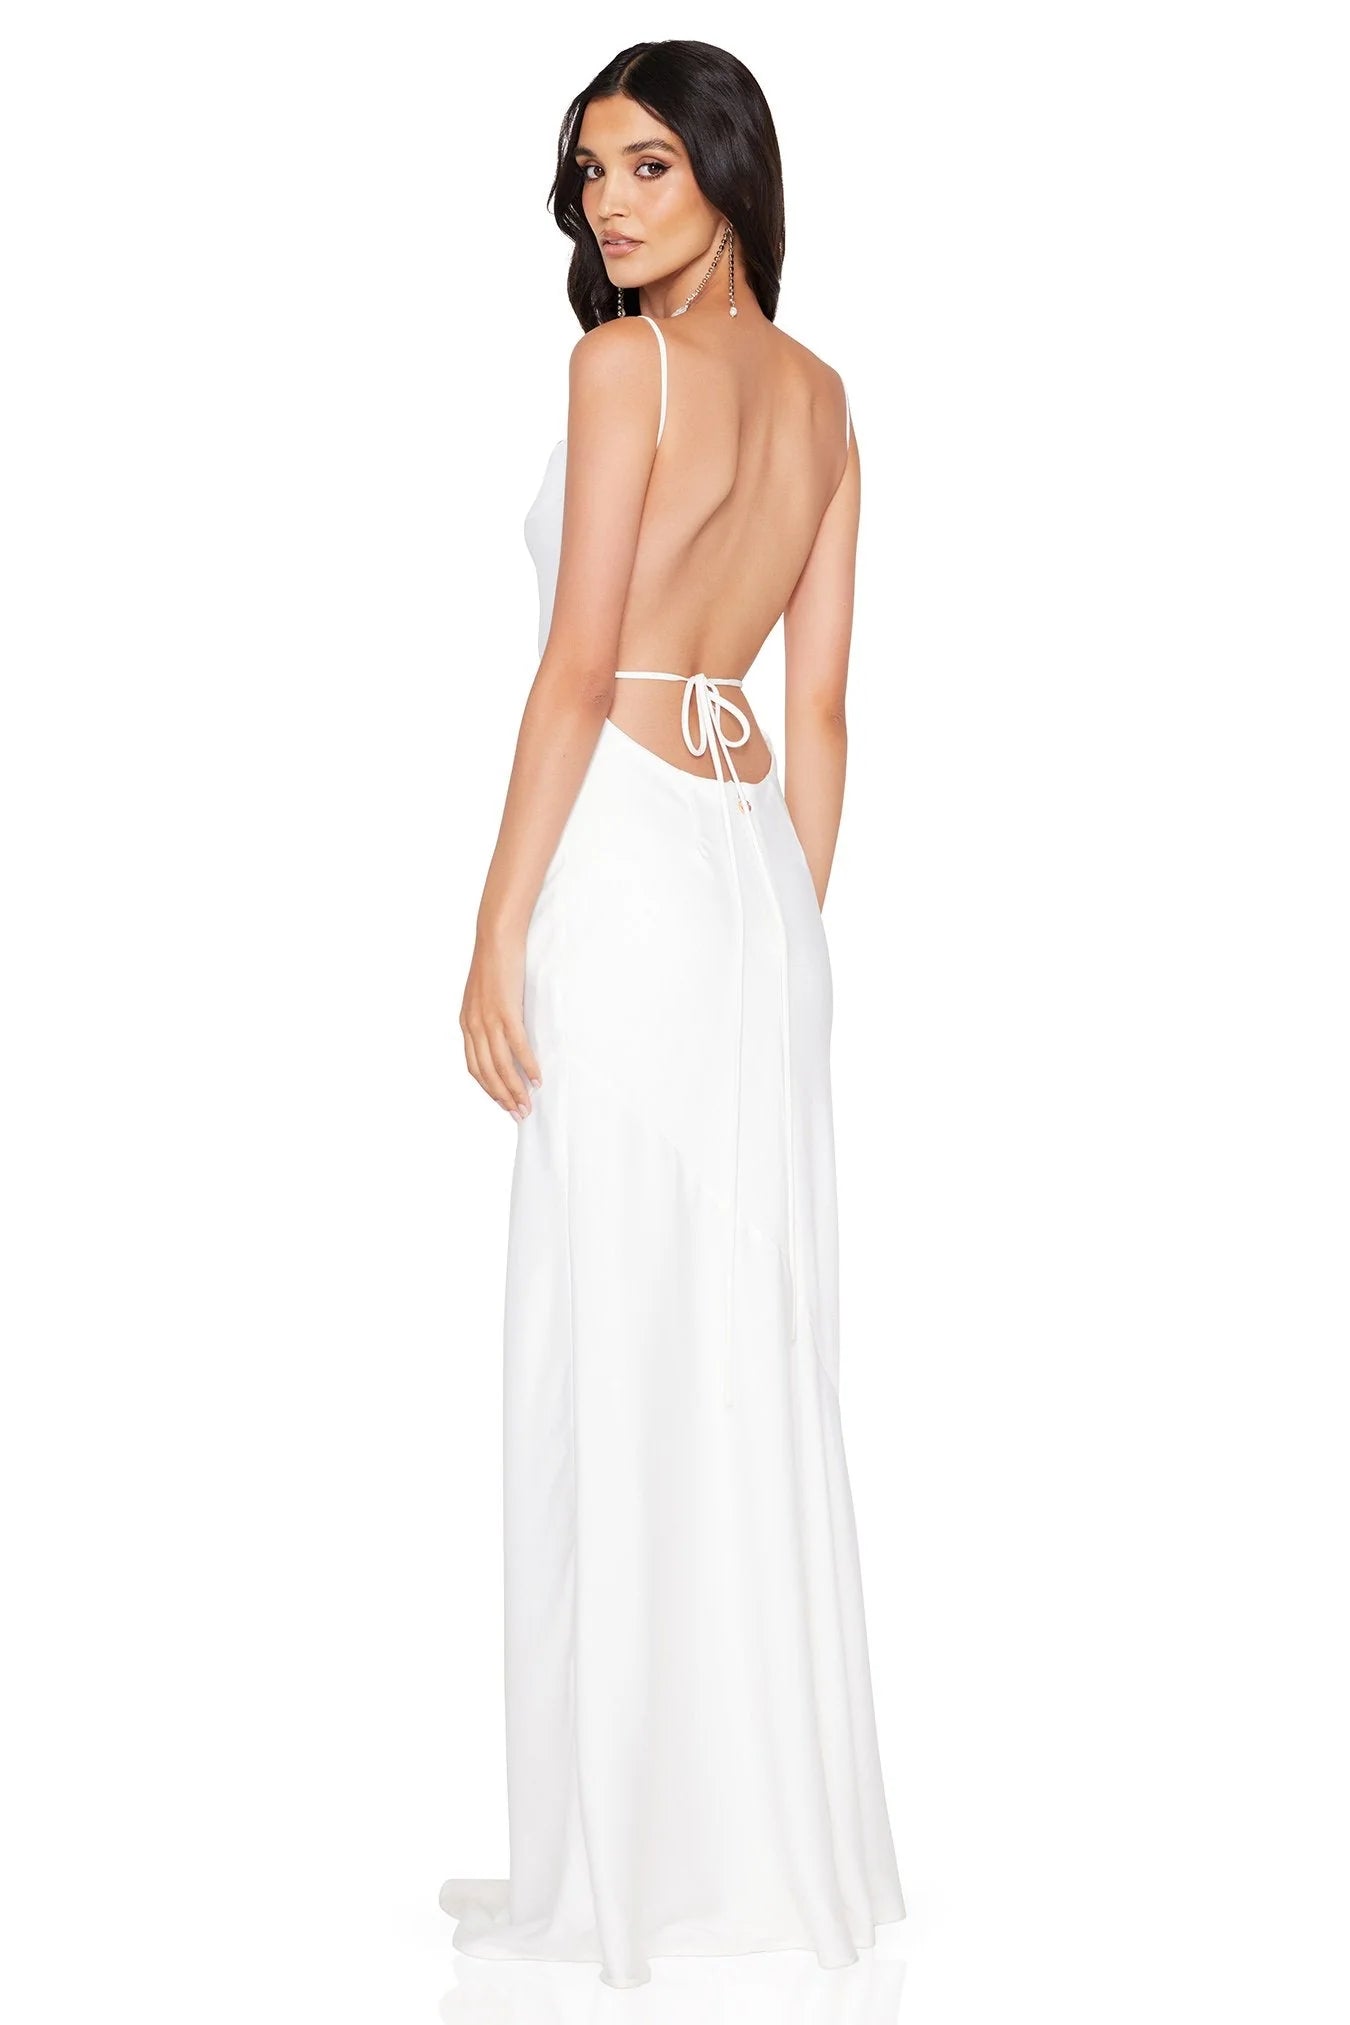 Entice Drape Gown - Ivory